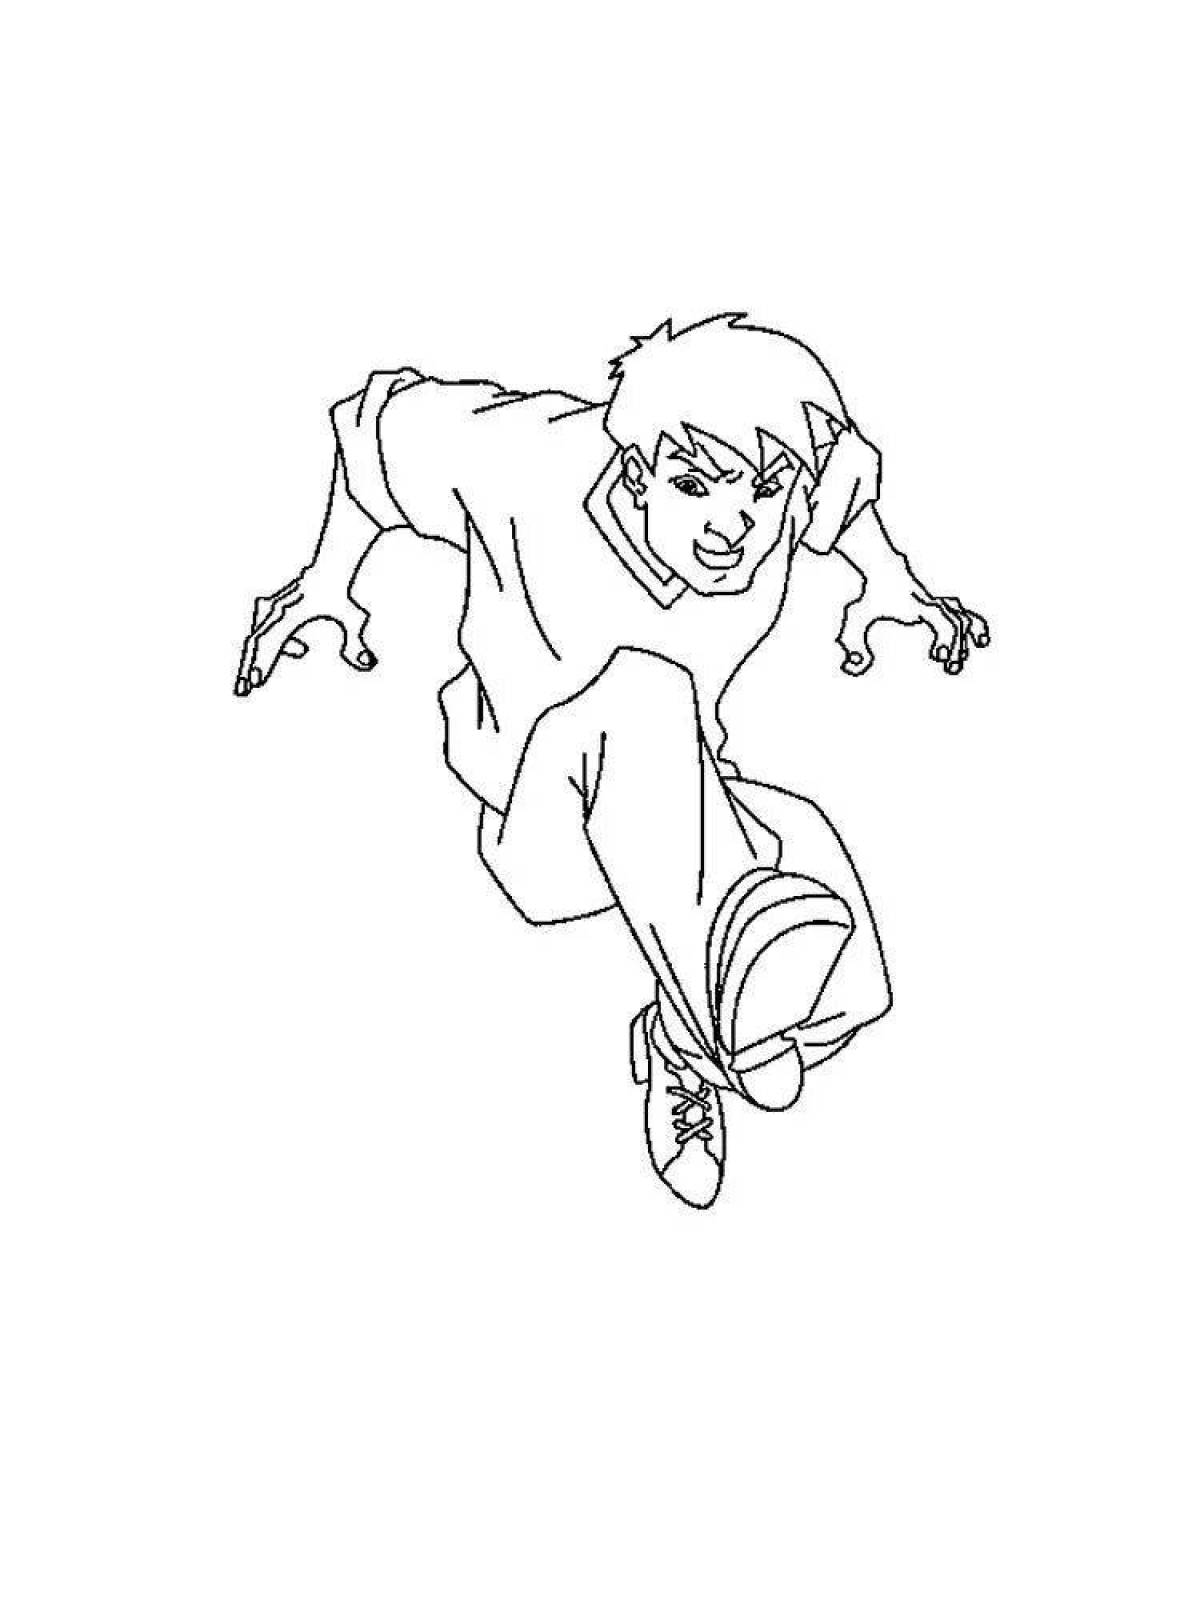 Coloring page adorable jackie chan